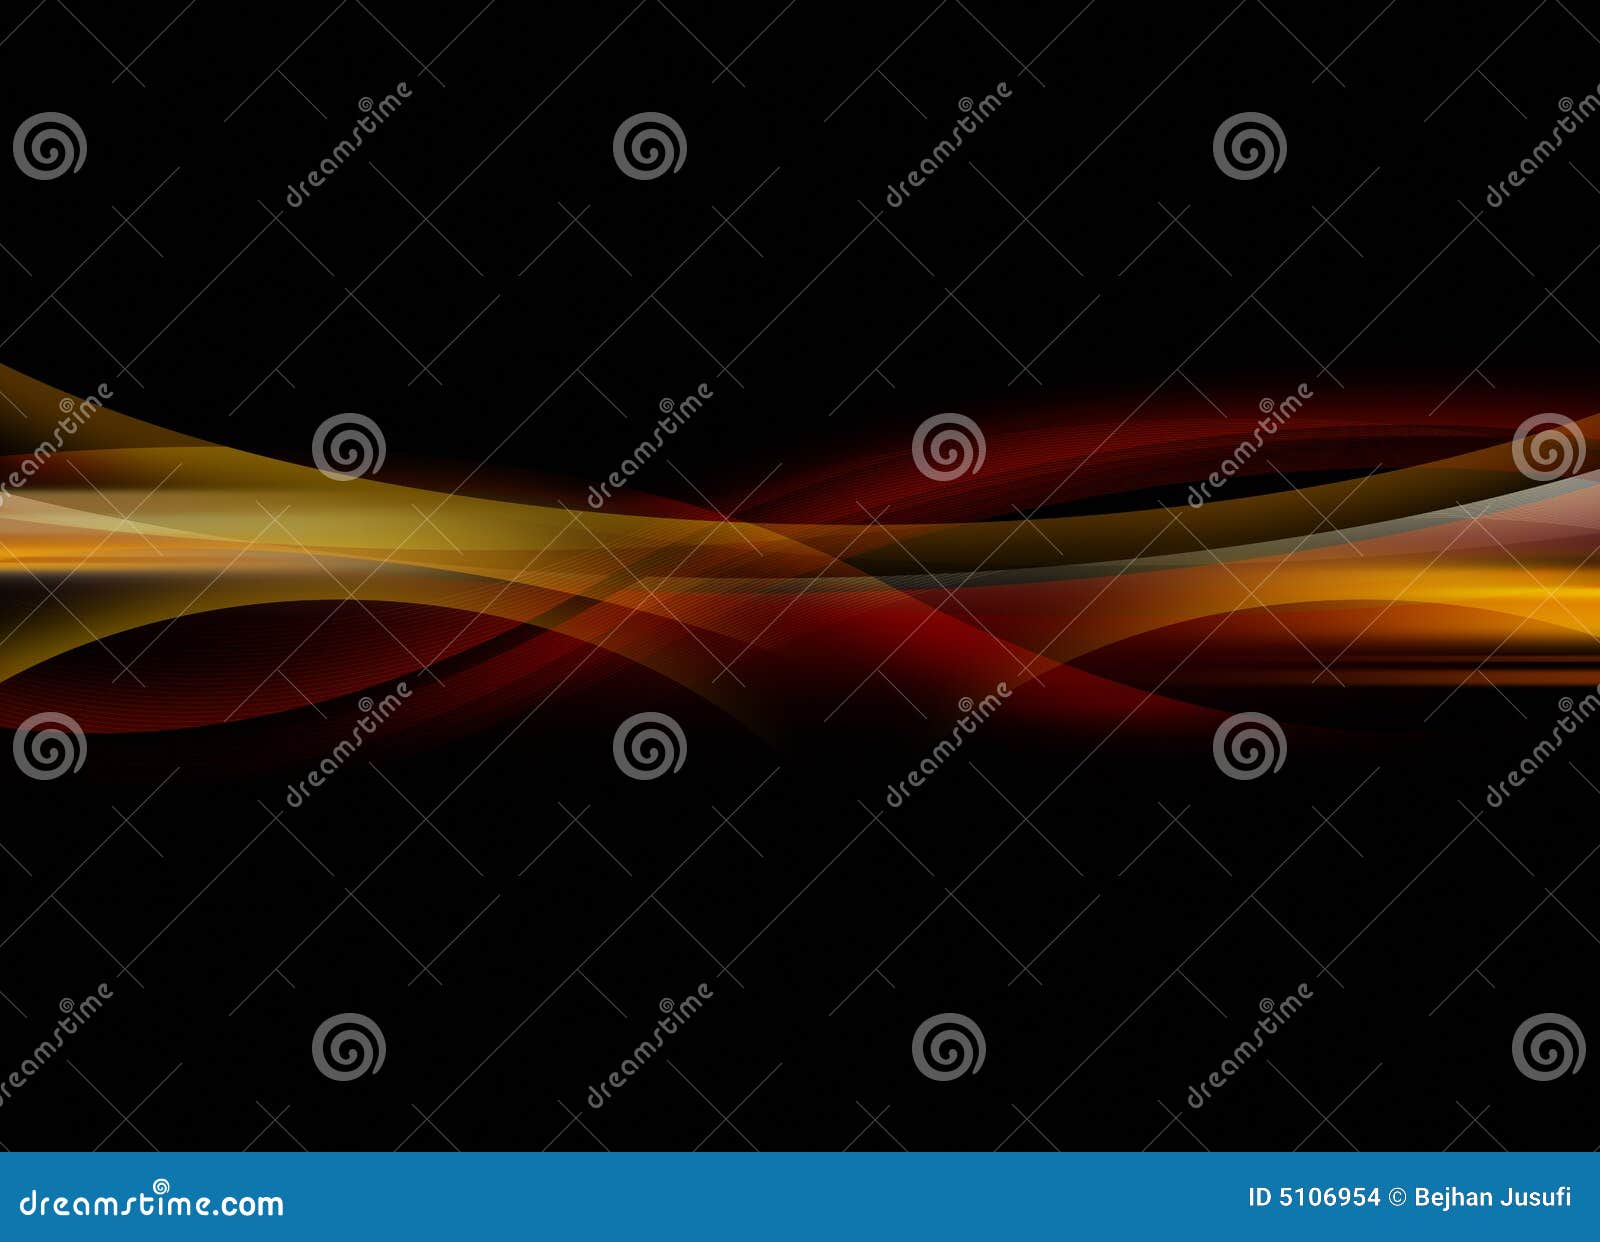 Abstract background image with smooth and dynamic curves.